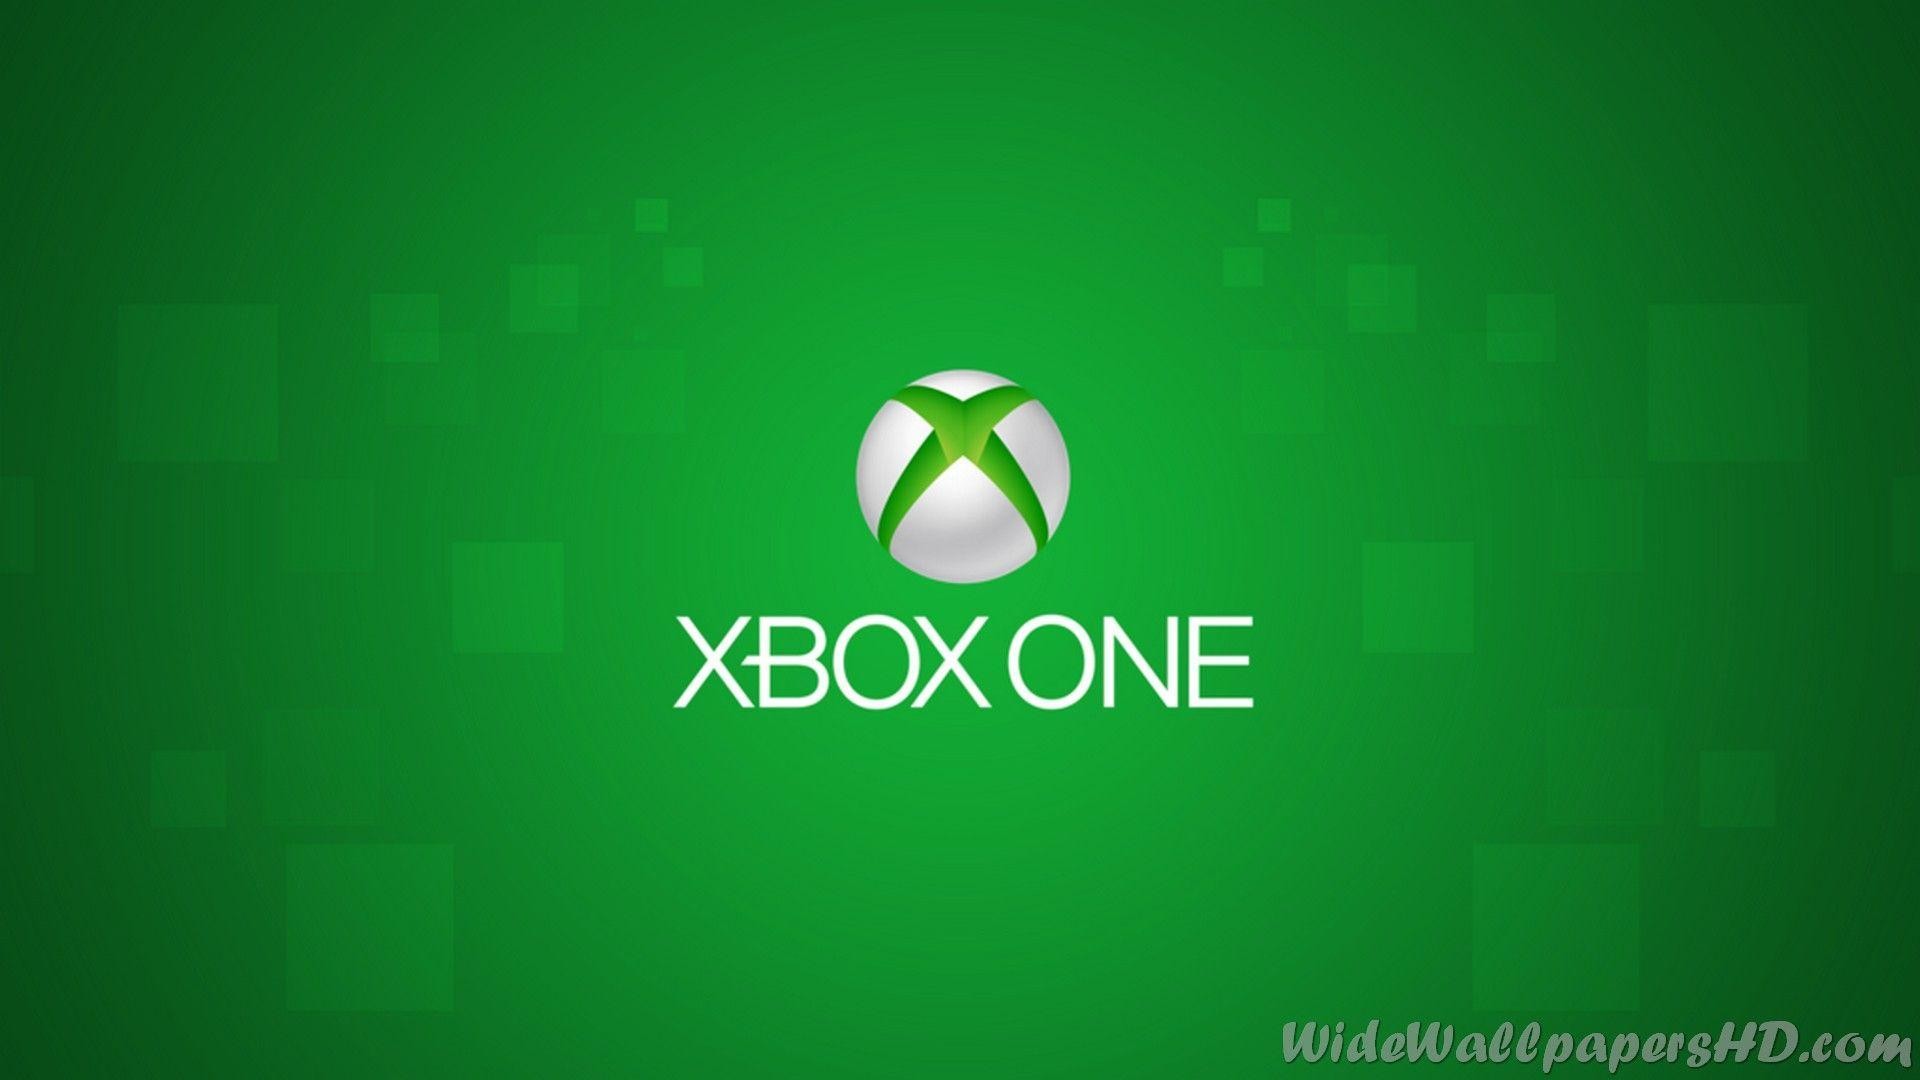 Xbox One Image Gallery Wide Wallpapers HD